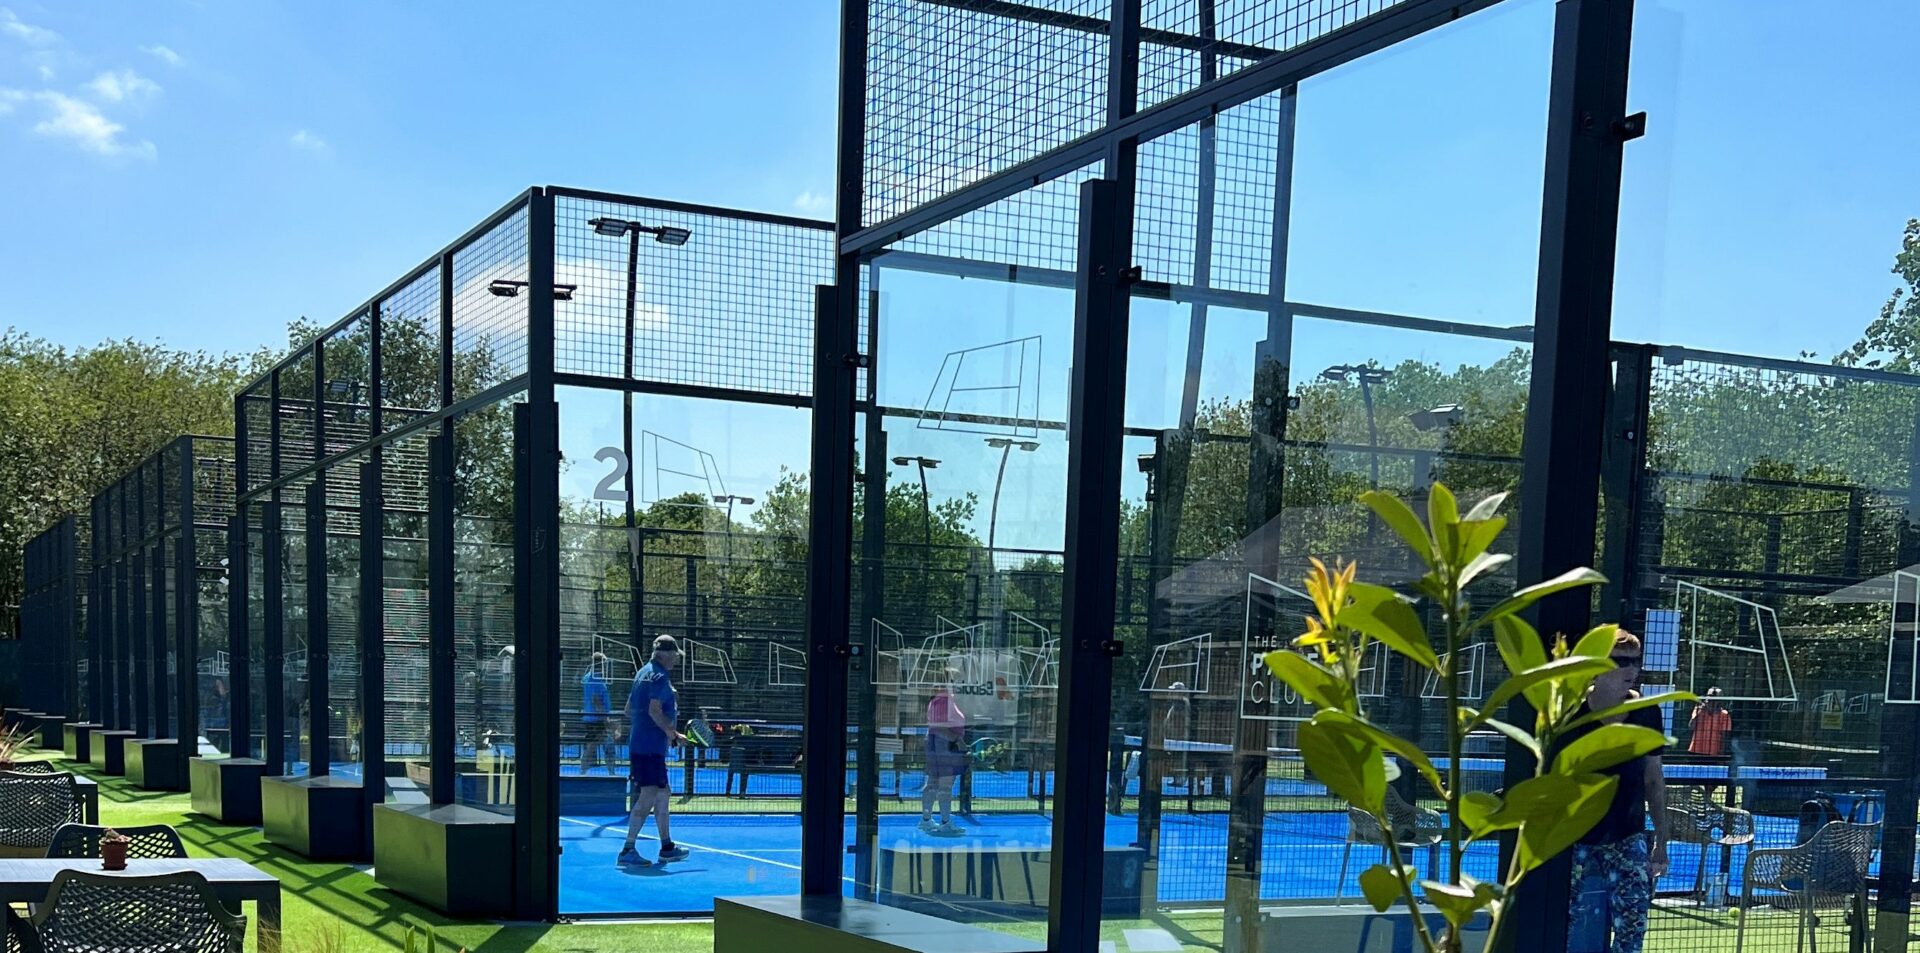 The Padel Club courts